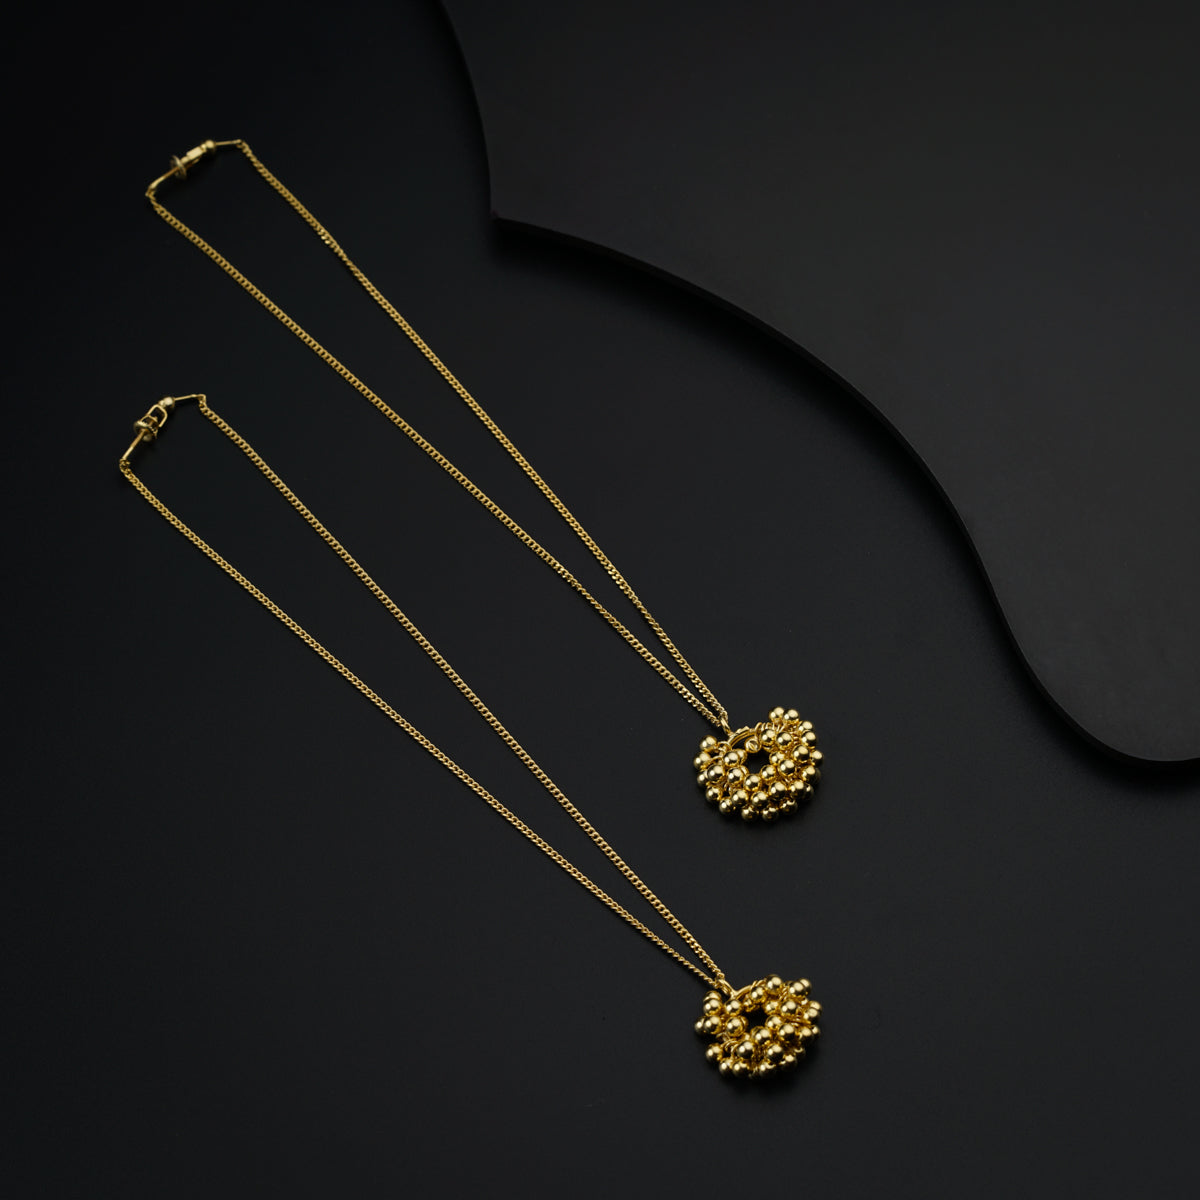 three gold necklaces on a black surface